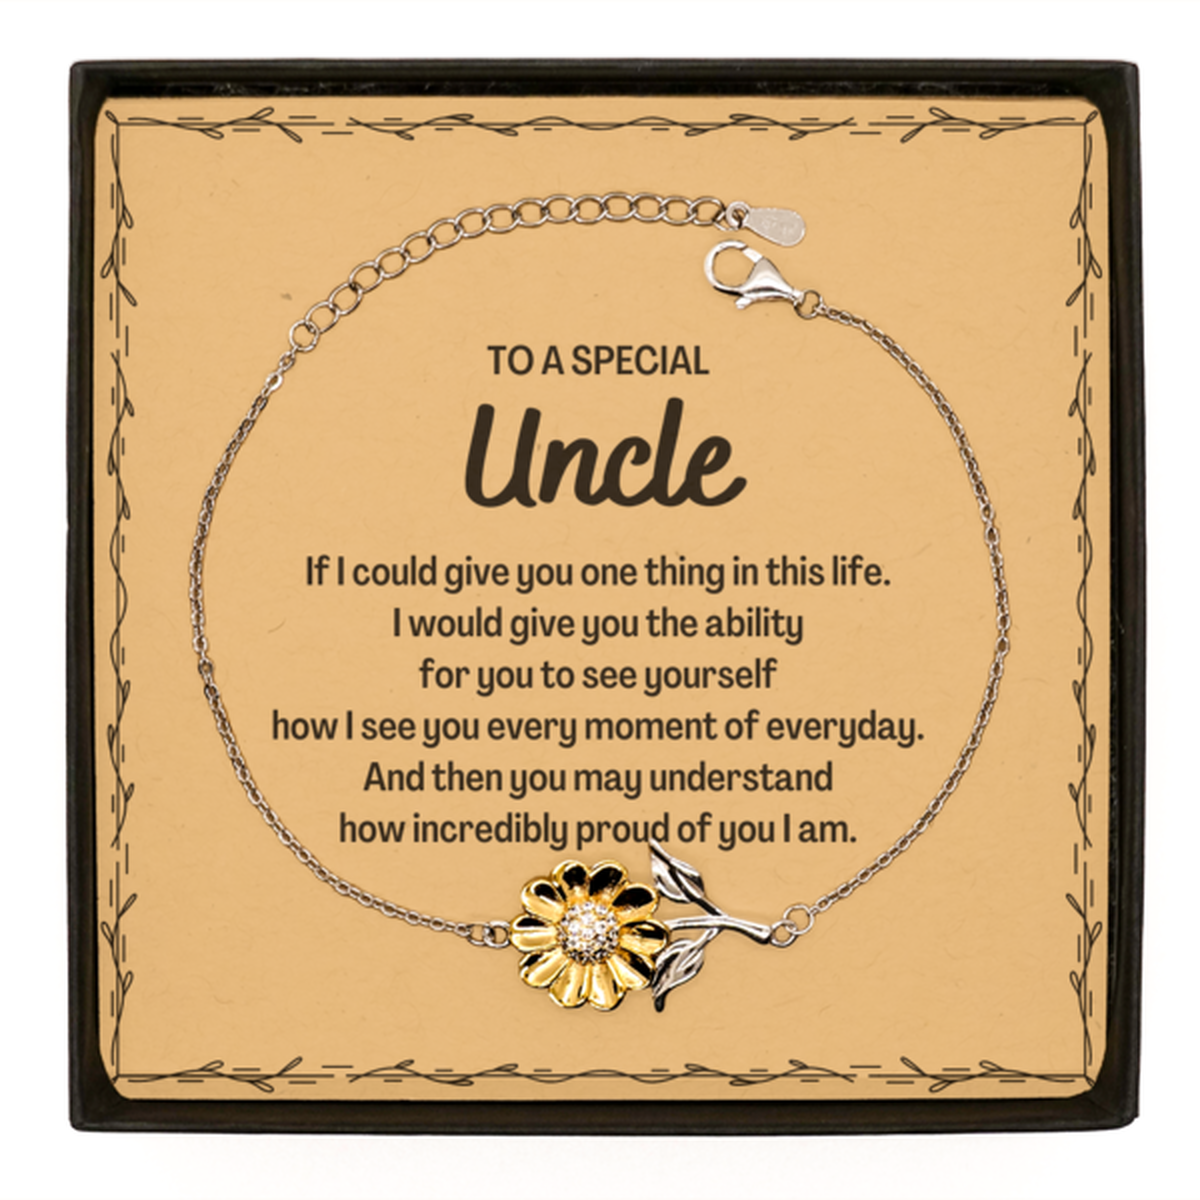 To My Uncle Sunflower Bracelet, Gifts For Uncle Message Card, Inspirational Gifts for Christmas Birthday, Epic Gifts for Uncle To A Special Uncle how incredibly proud of you I am